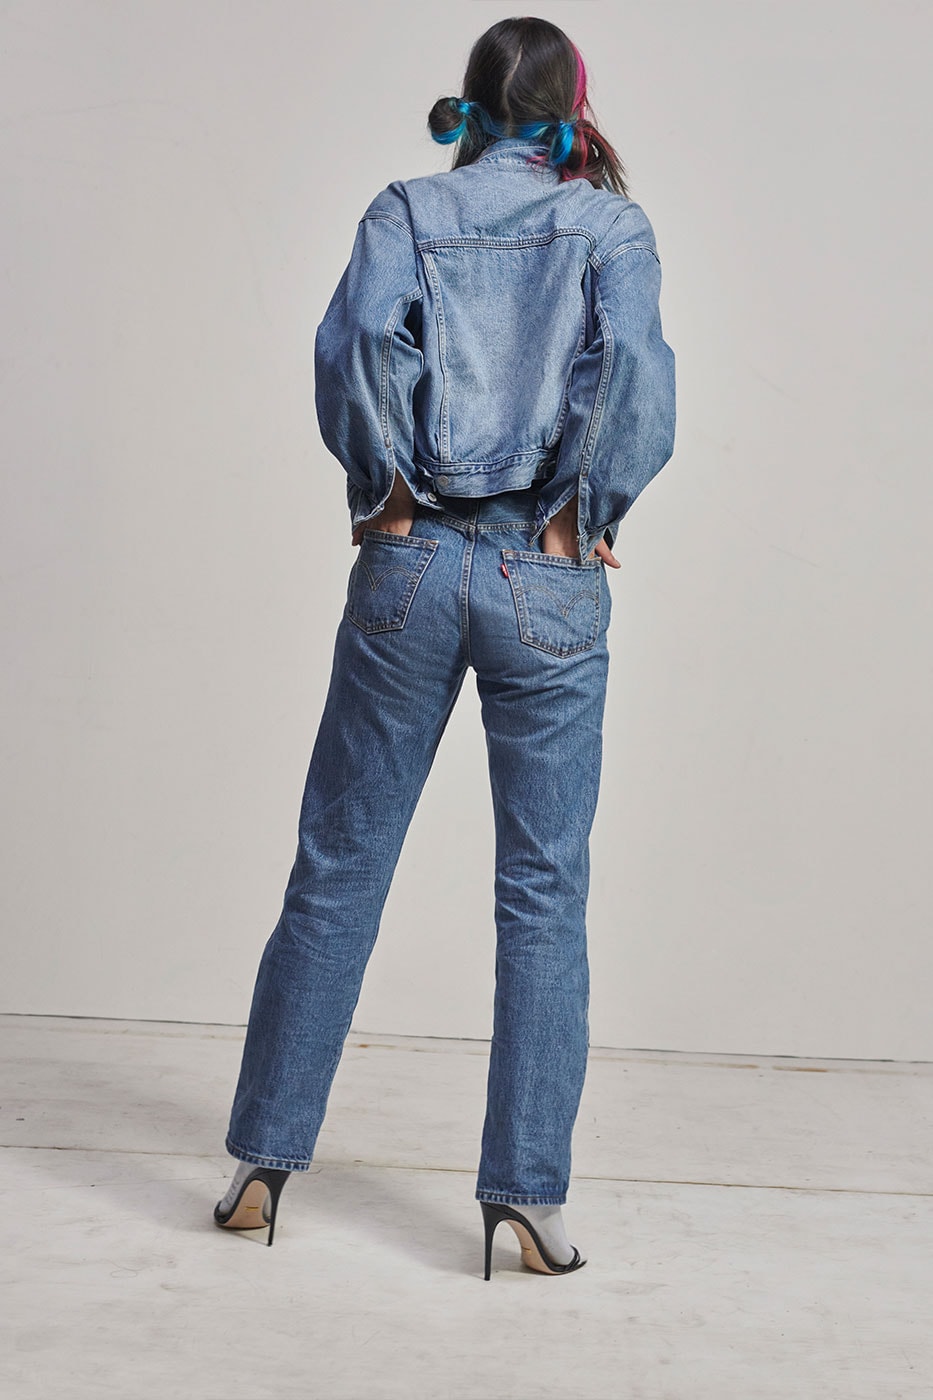 Levis 501 90s The Number that Changed Everything Campaign Collection Release Info Featuring Kid Cudi Tremaine Emory Beastie Boys Mike D Nathan Westling Gia Seo Gabriella Karefa-Johnson Staz Lindes